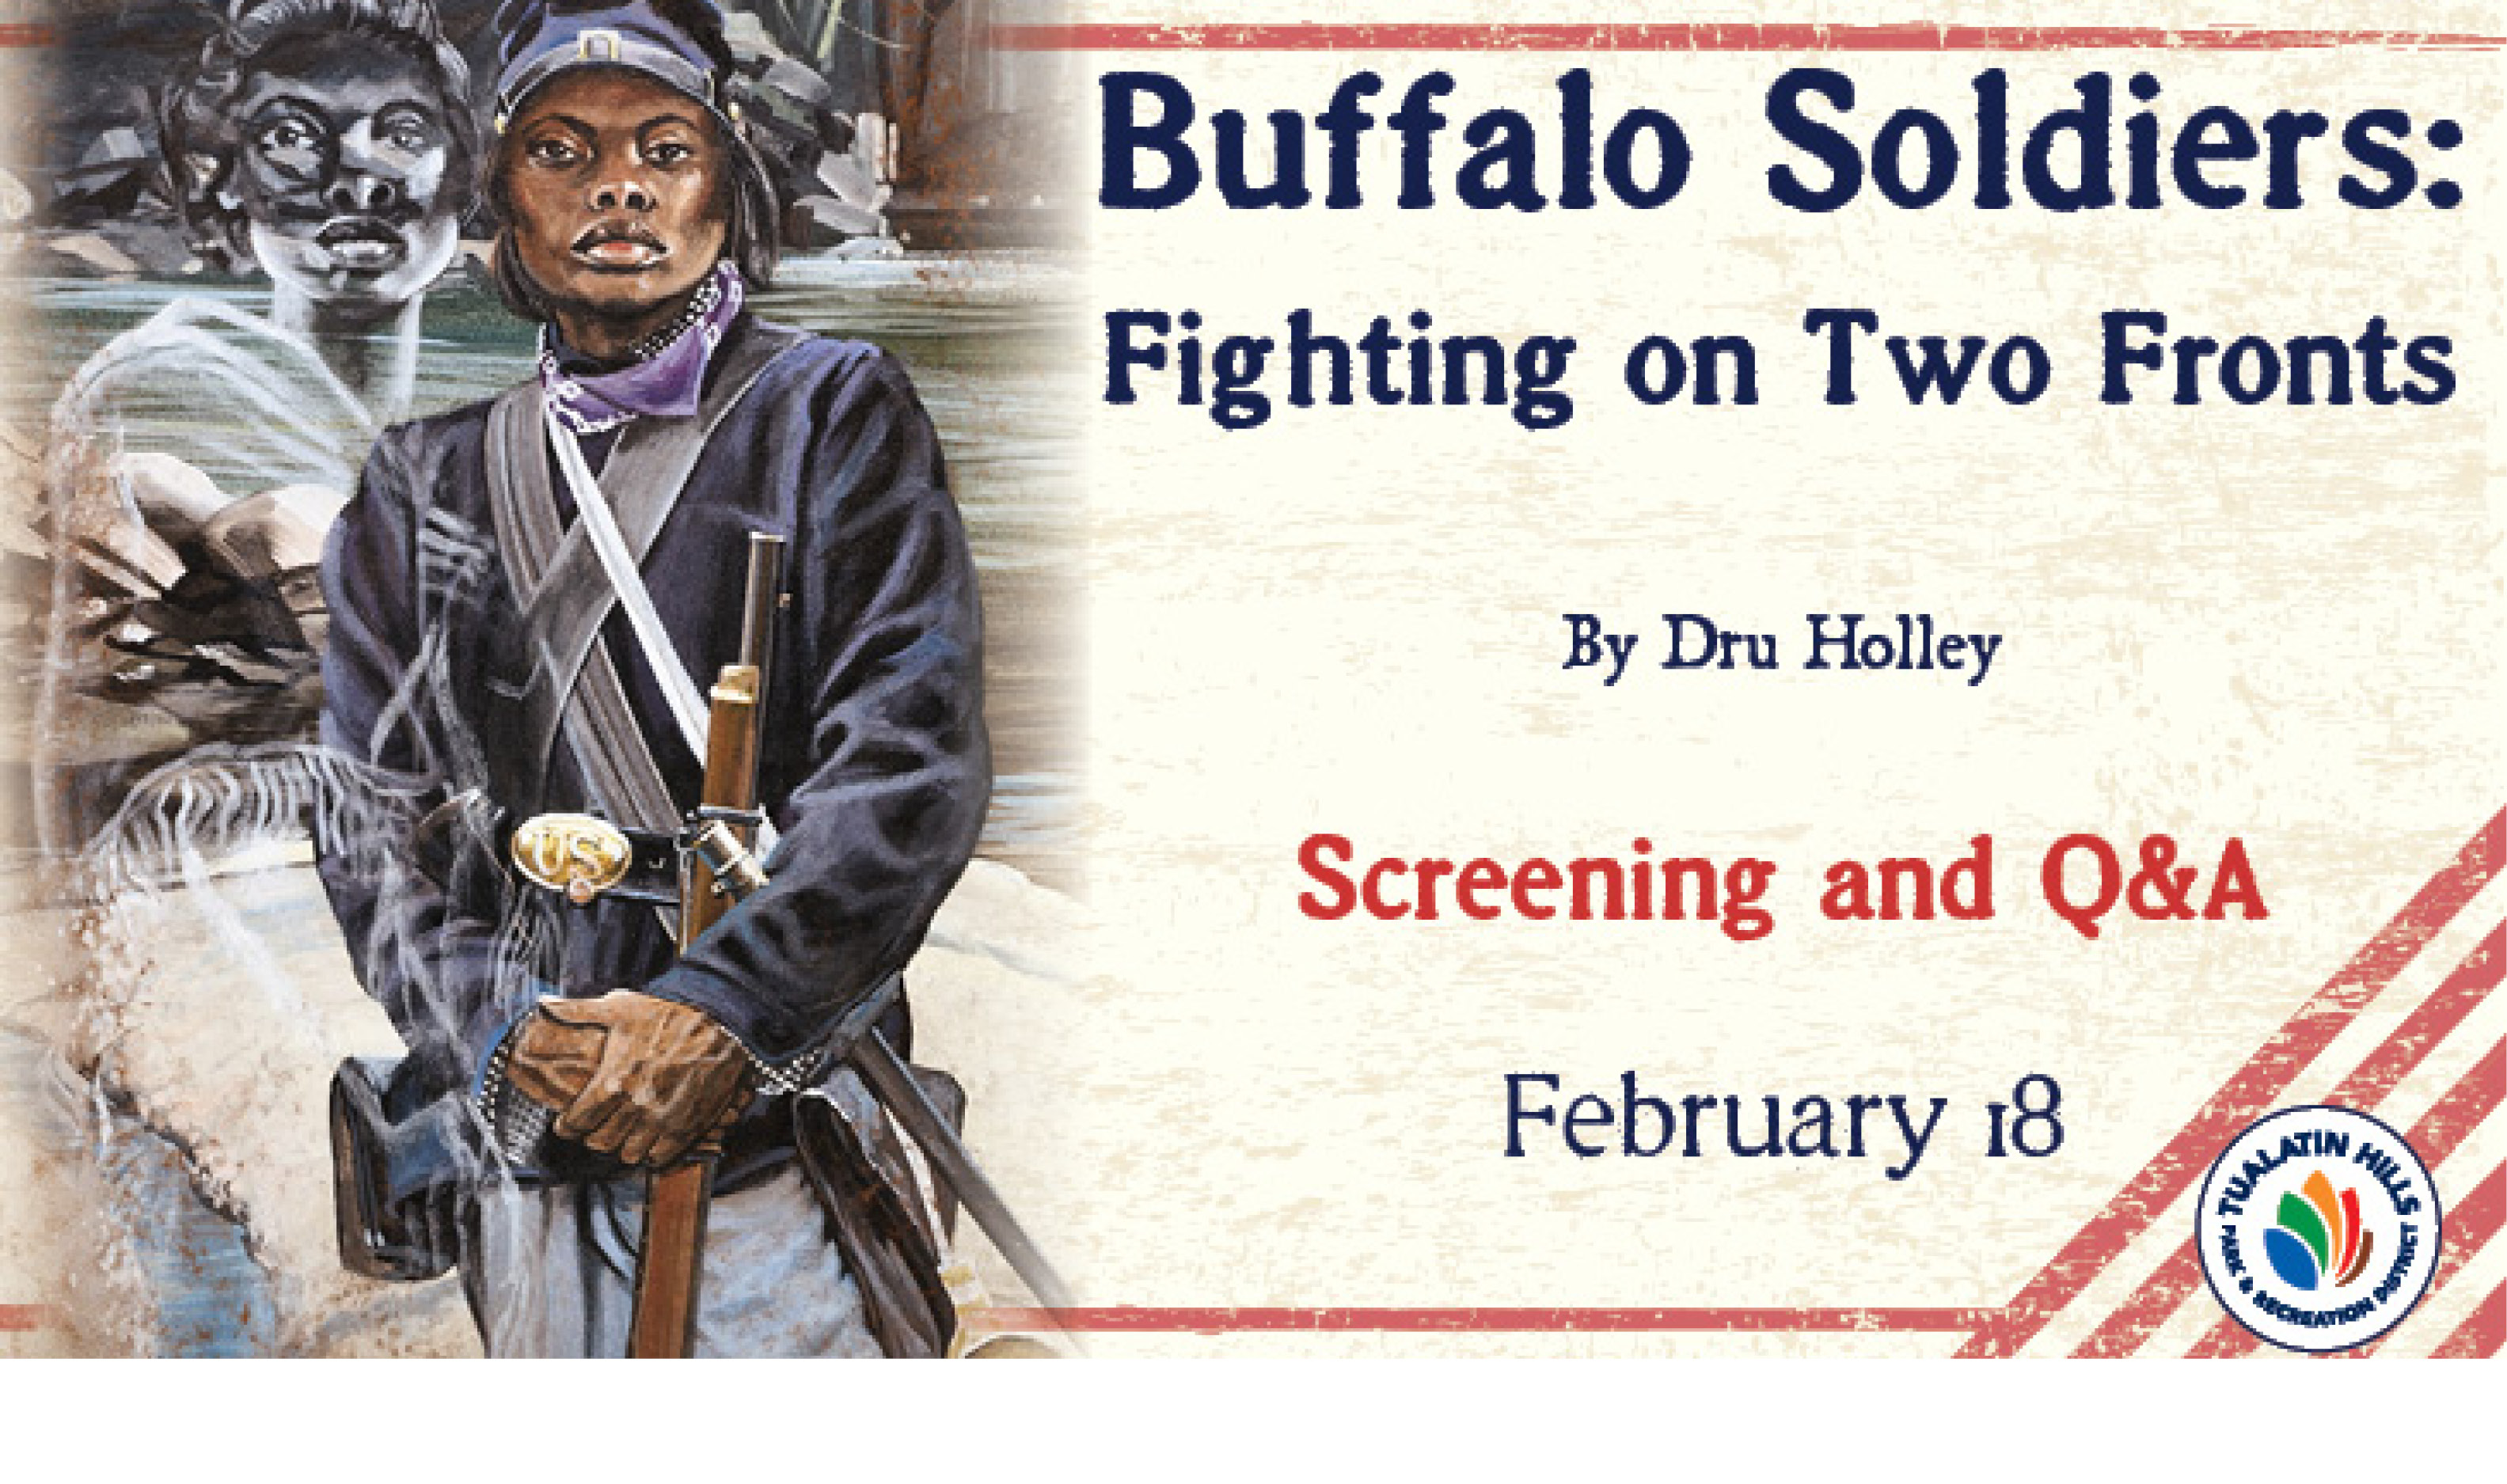 Buffalo Soldiers: Fighting on Two Fronts - Film screening on February 18